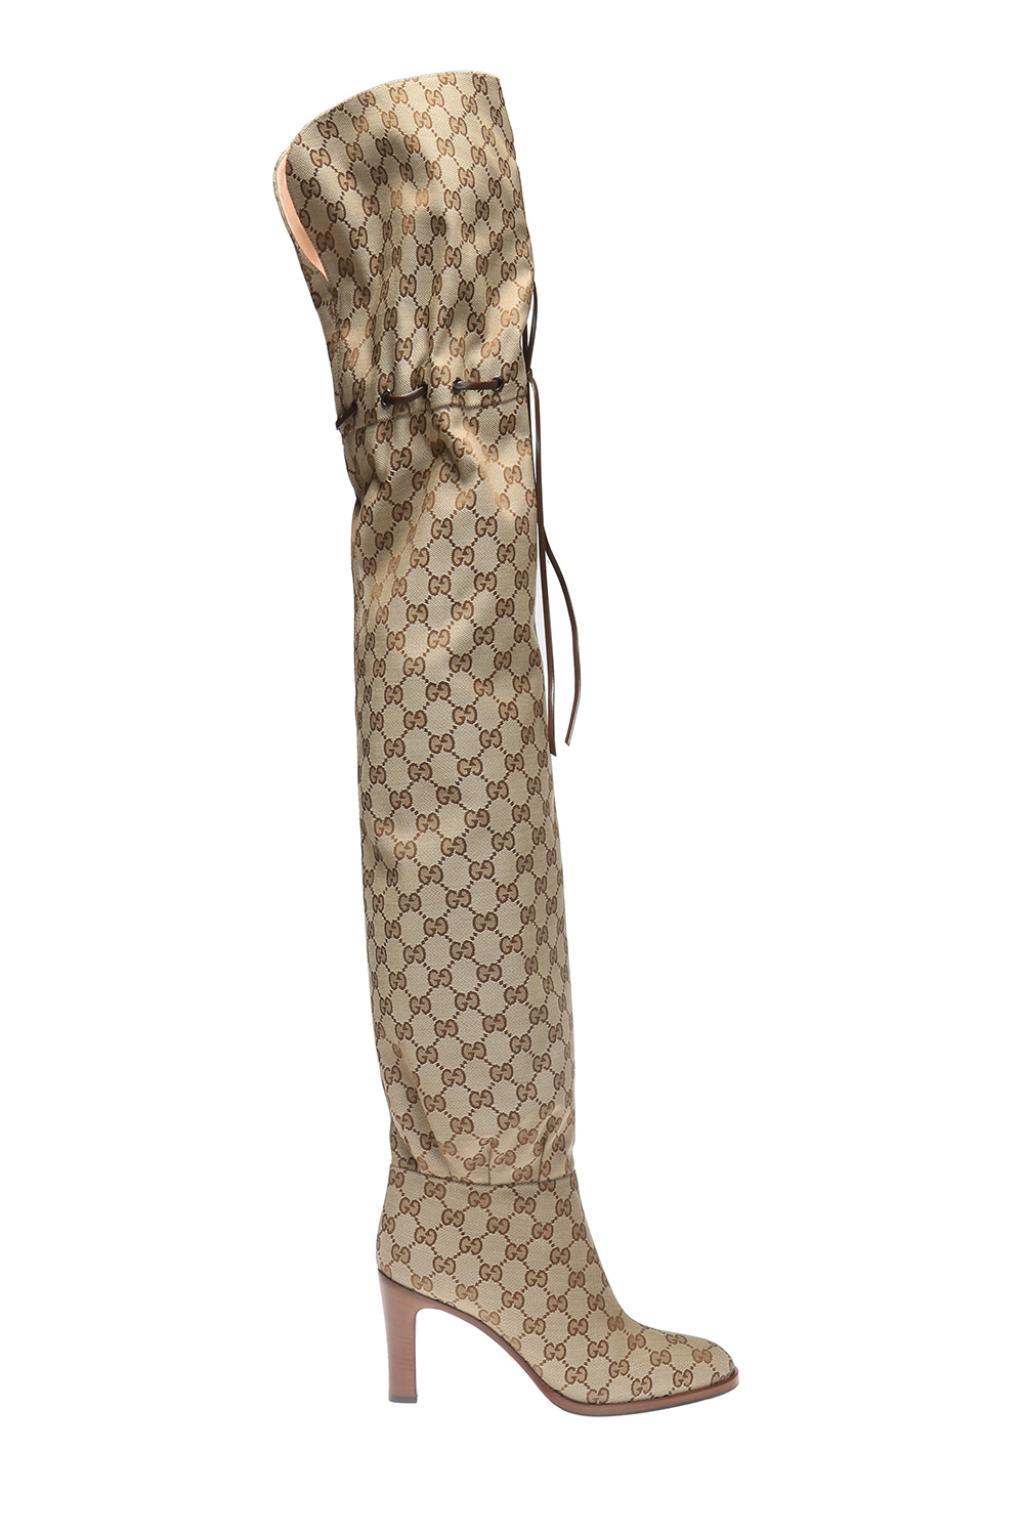 Gucci Women's GG Canvas Thigh-High Boots 37 1/2 / Authentic